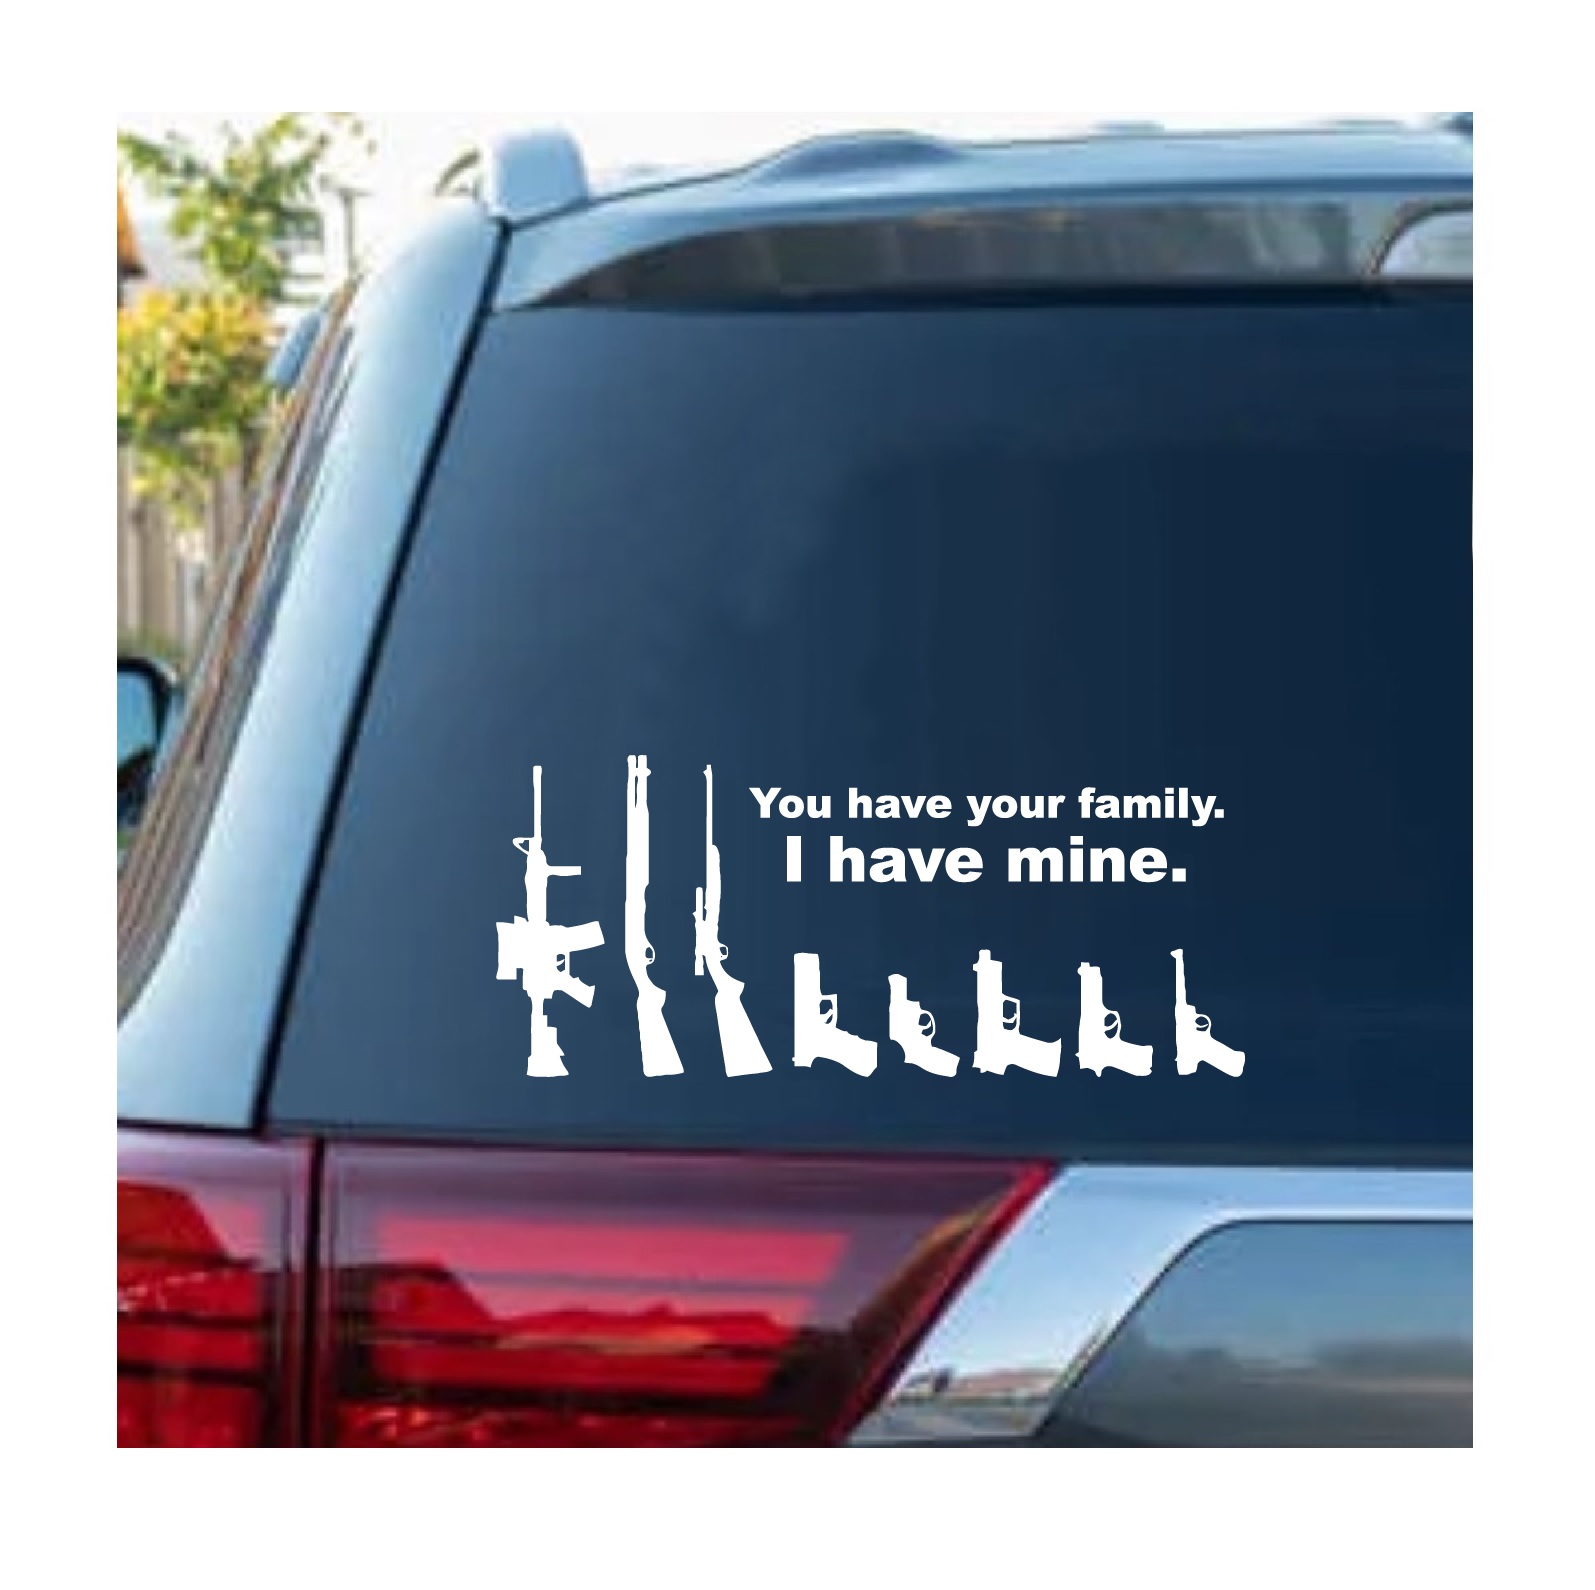 stickers for cars windows